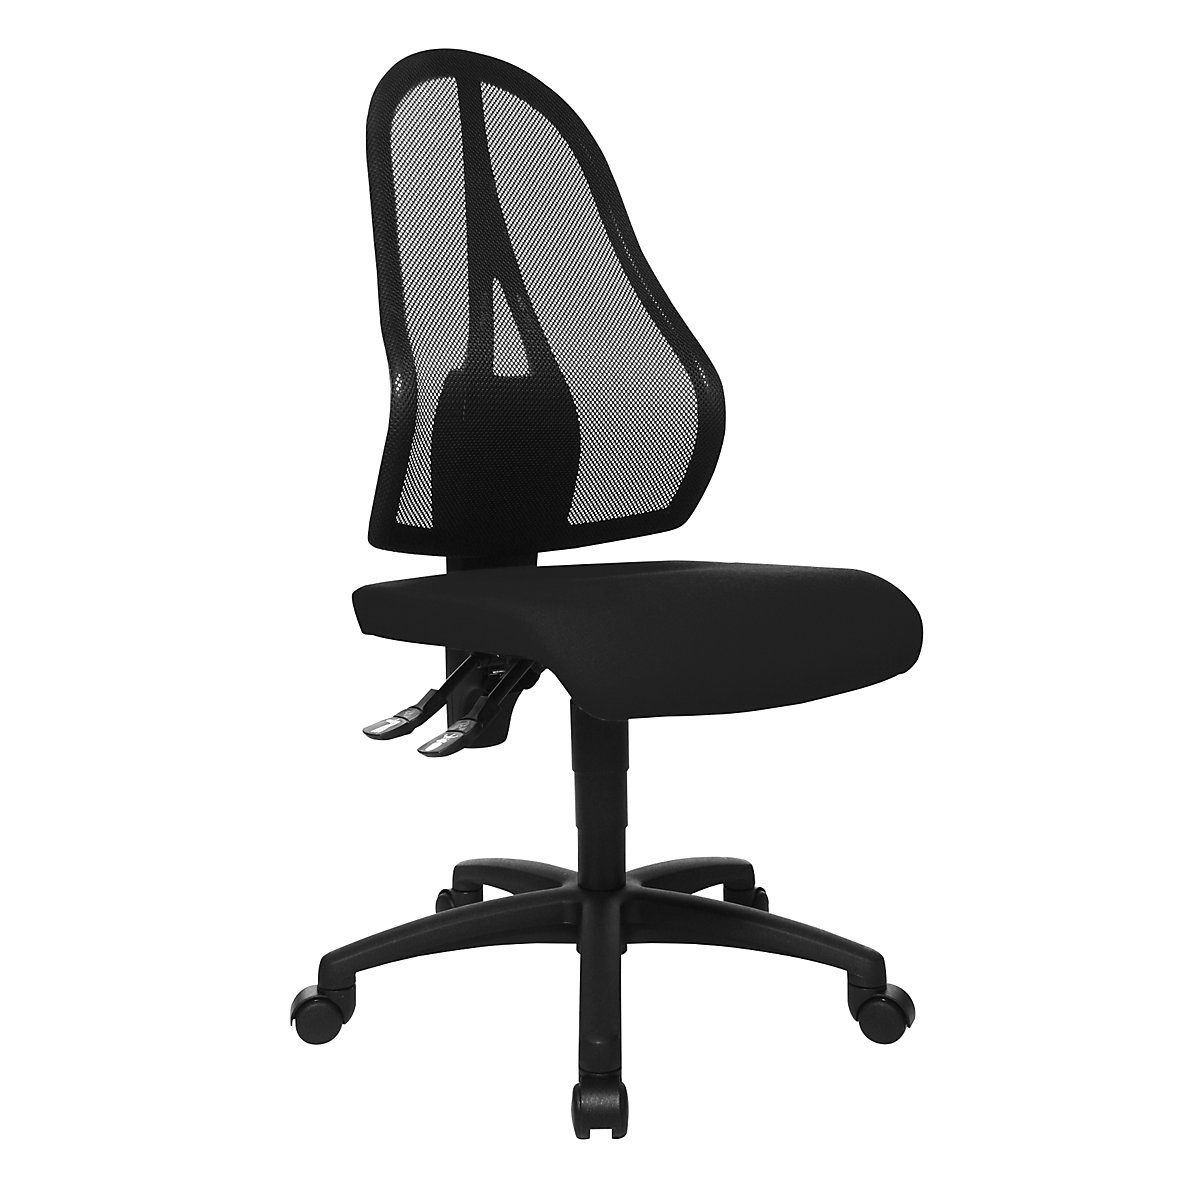 OPEN POINT P office swivel chair – Topstar, mesh back rest in black, without arm rests, black seat cover-4